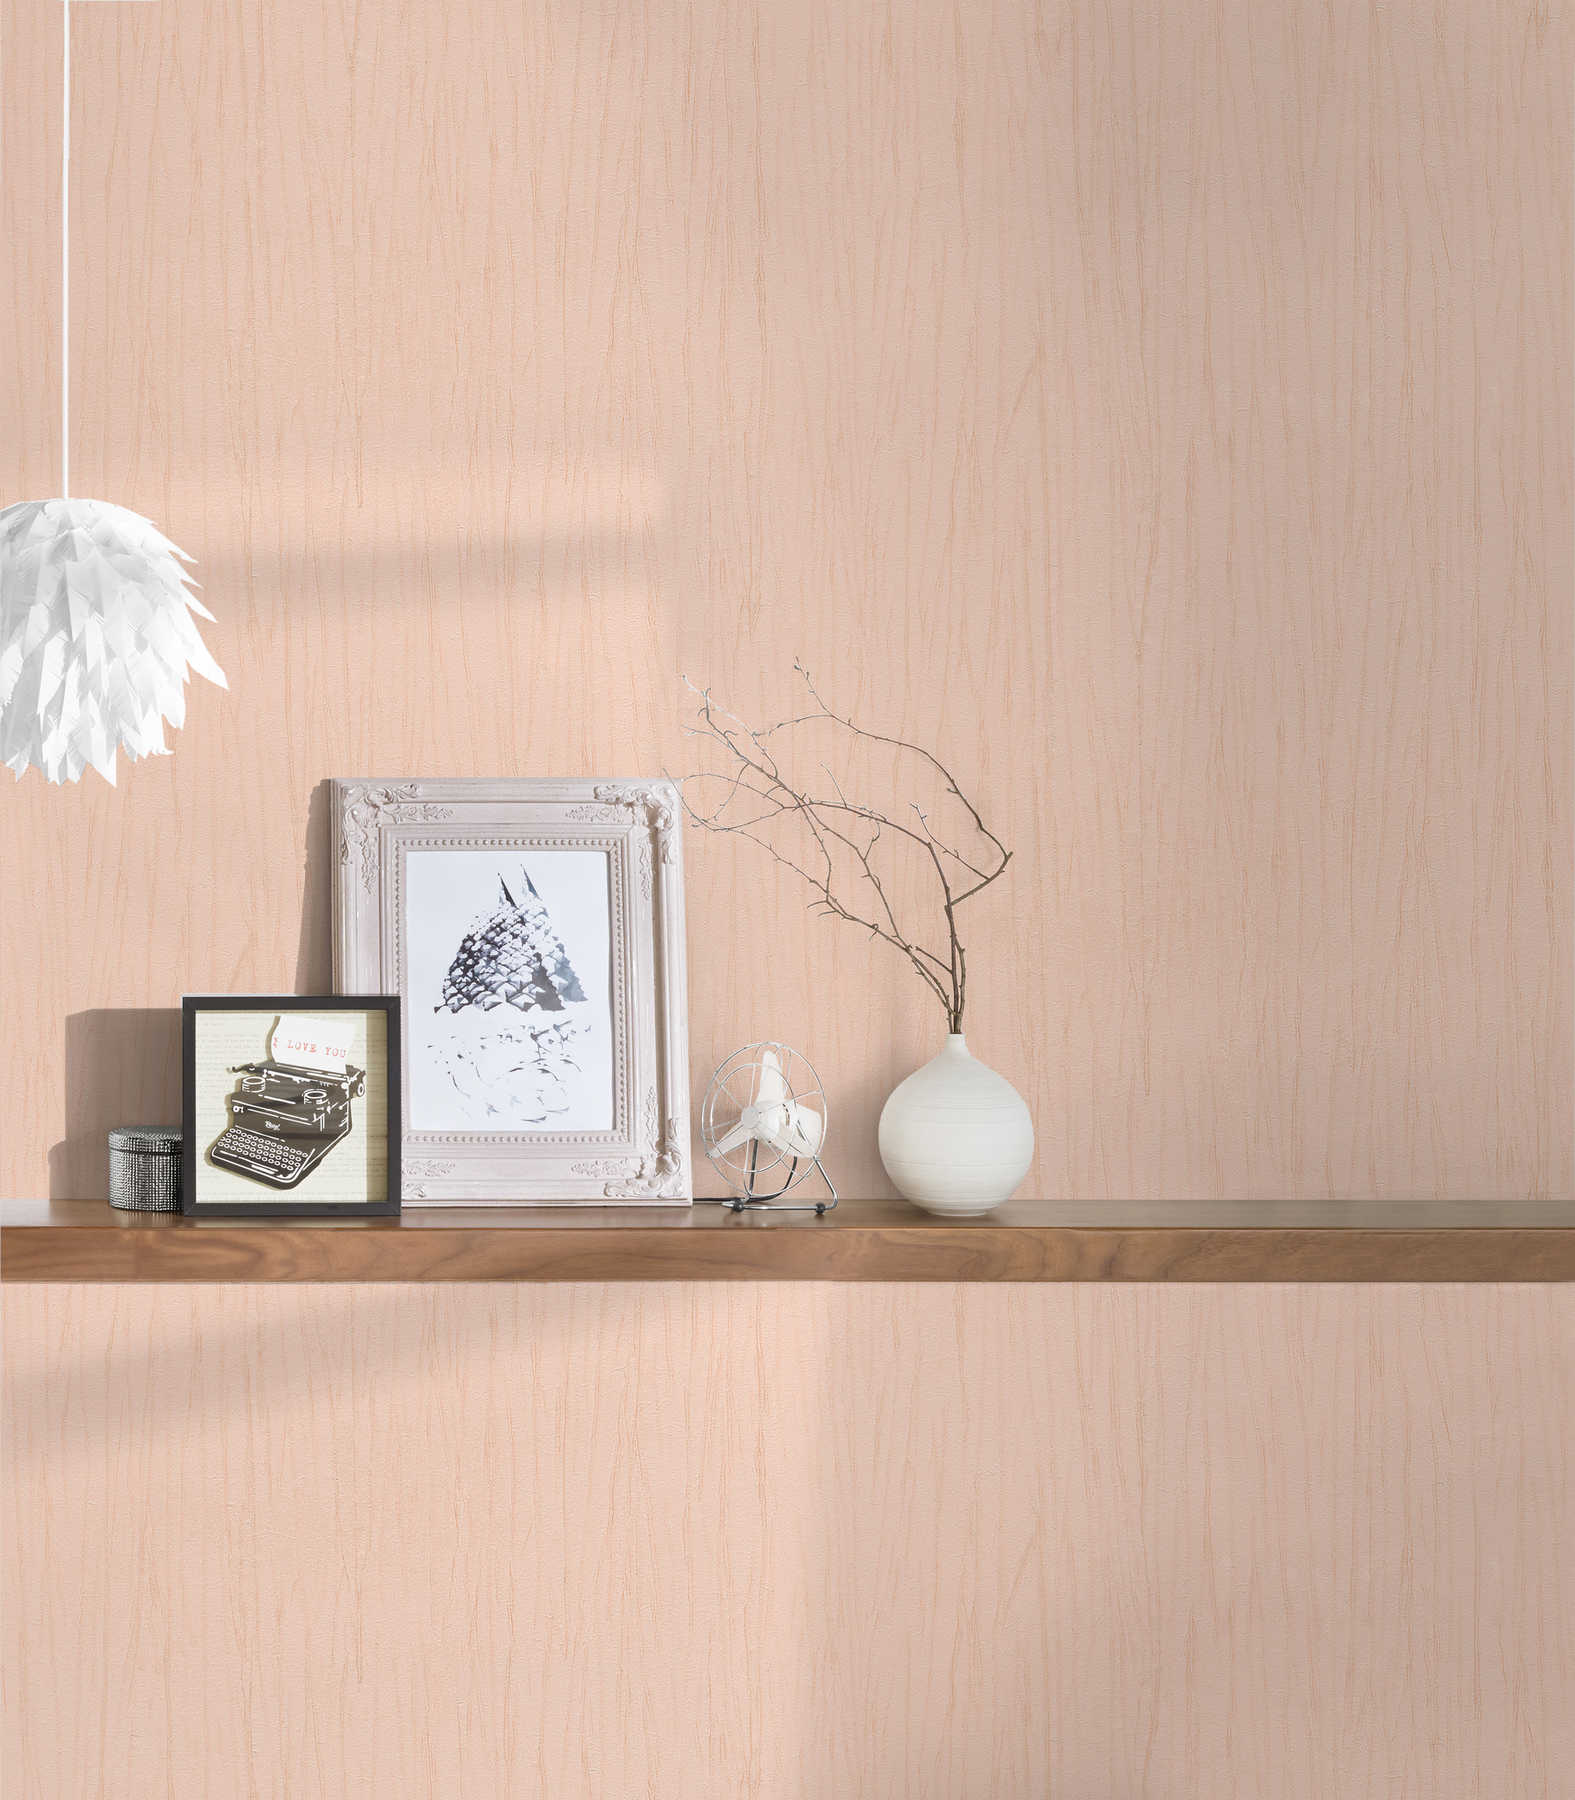             Wallpaper pink glitter effect & embossed texture with nature design
        